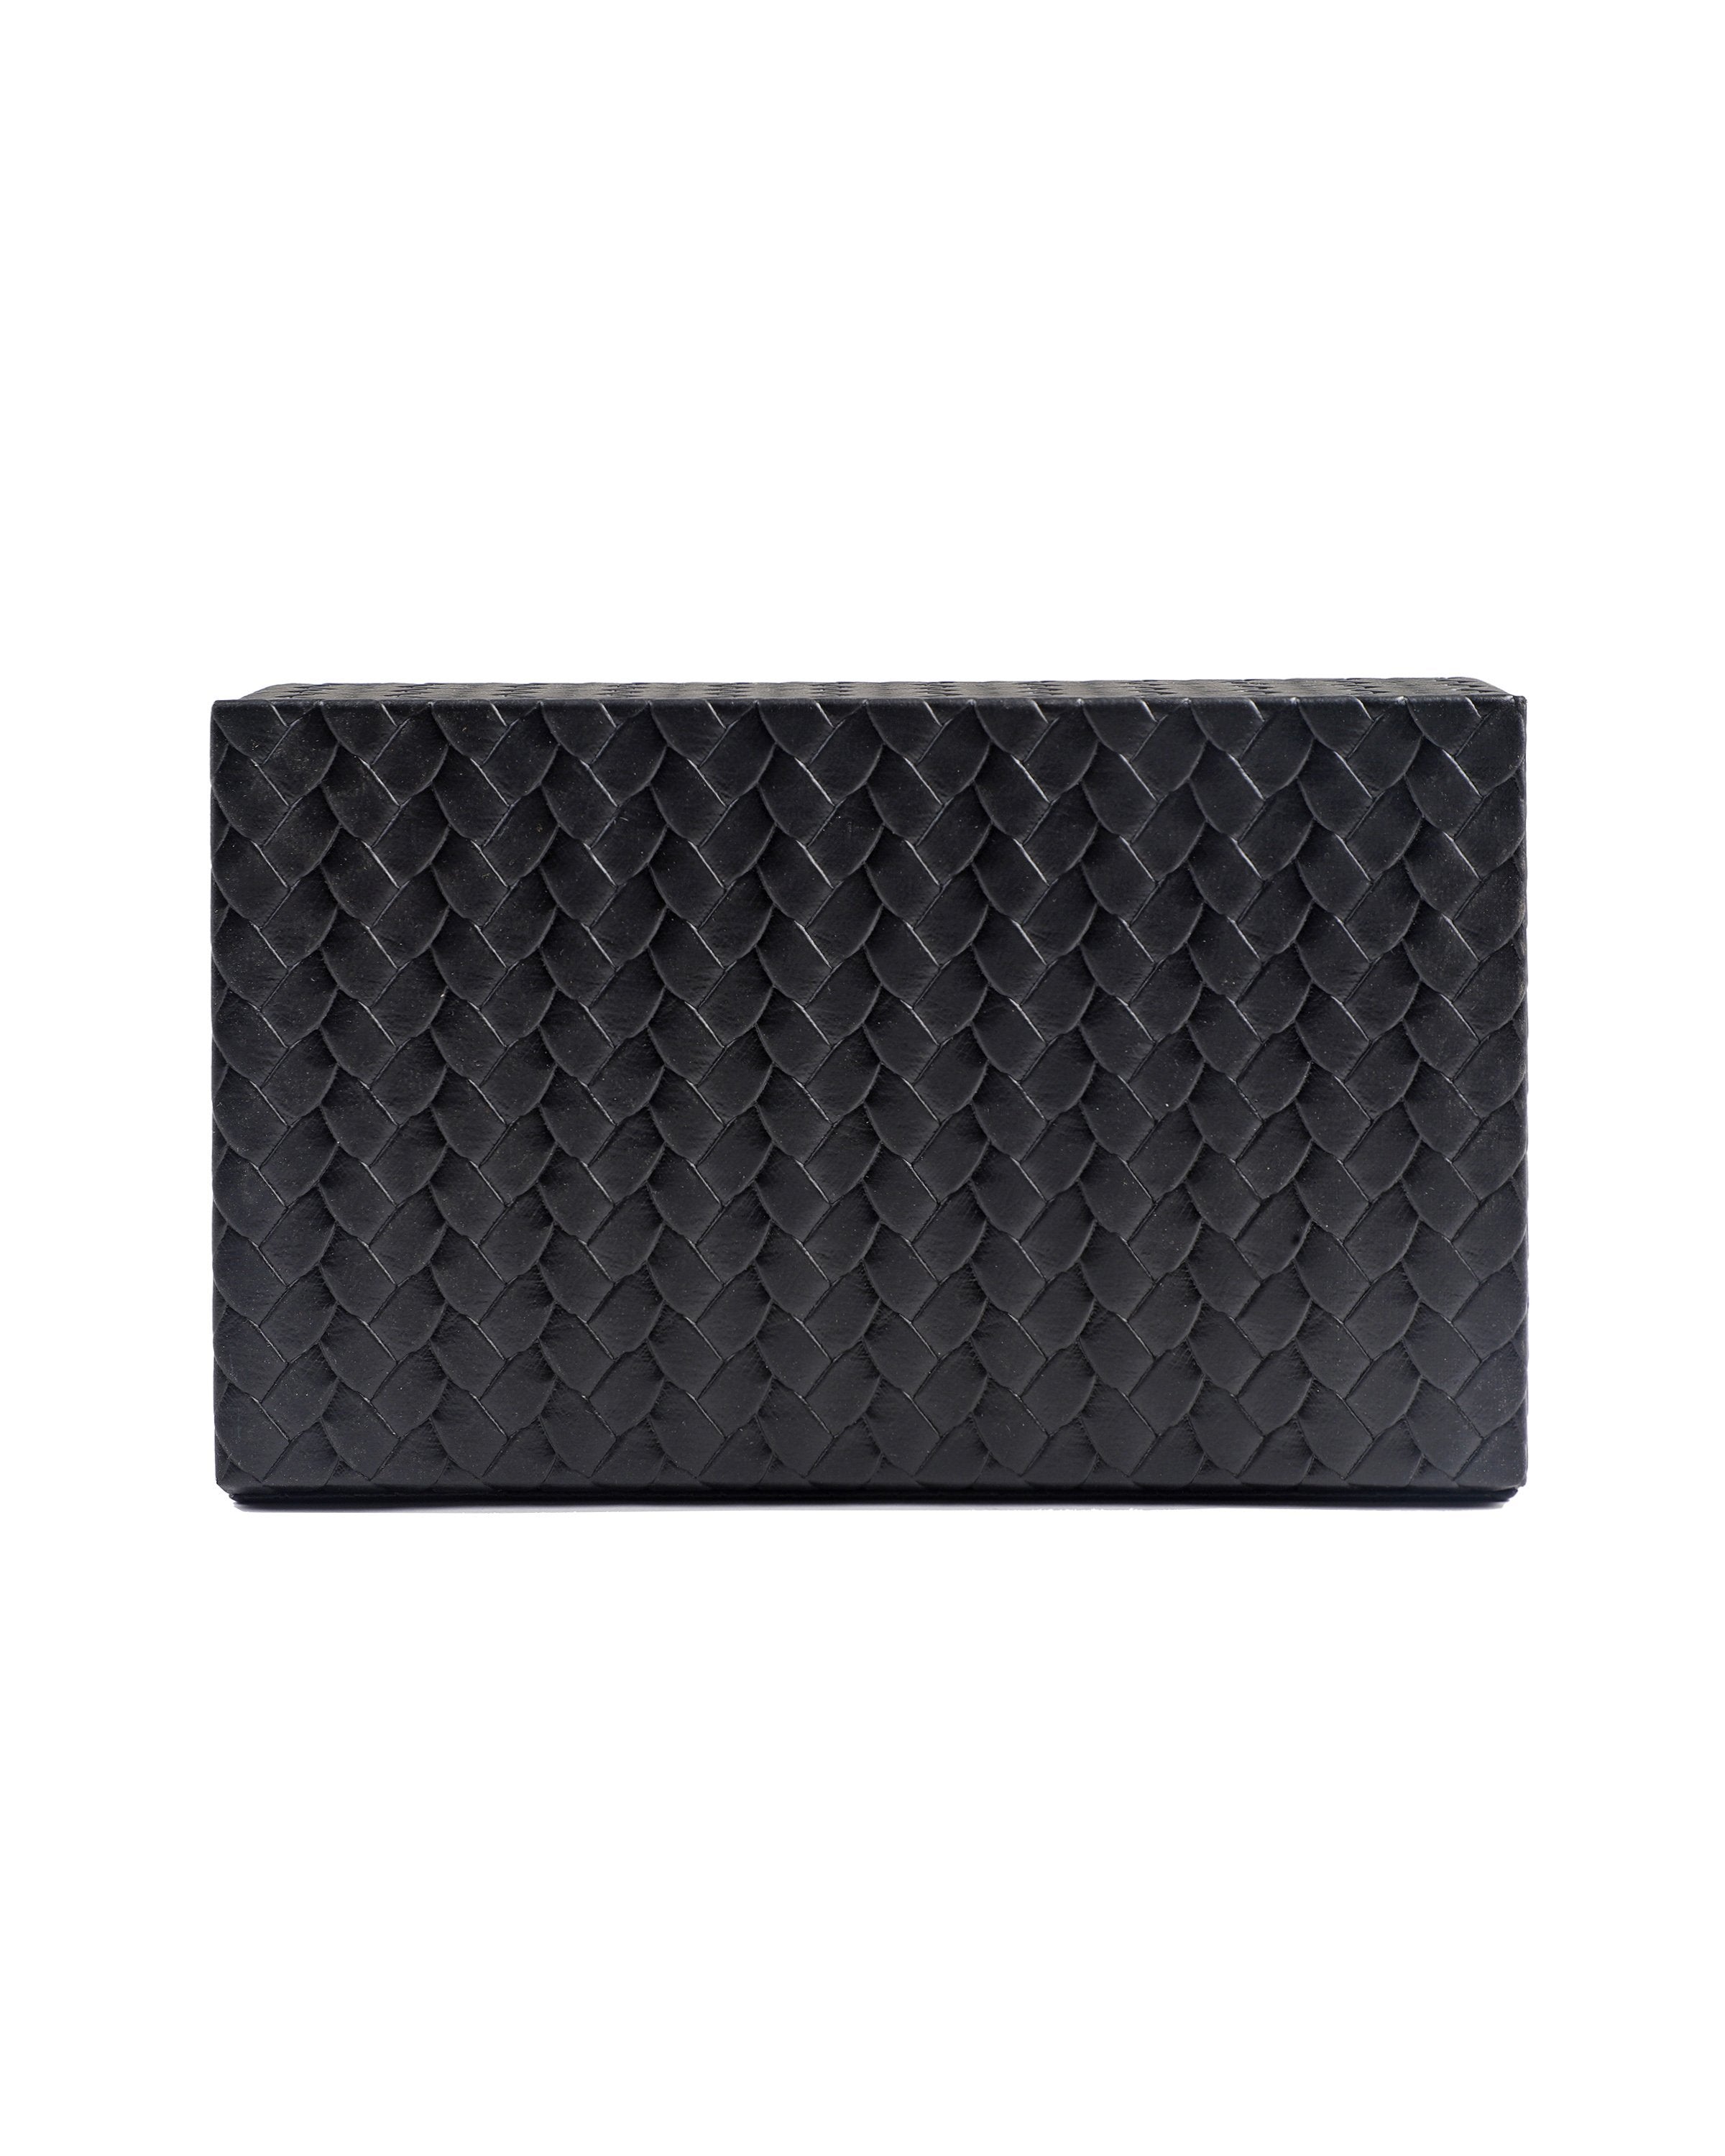 High-Quality Black Classic Office Desk Leather Mat